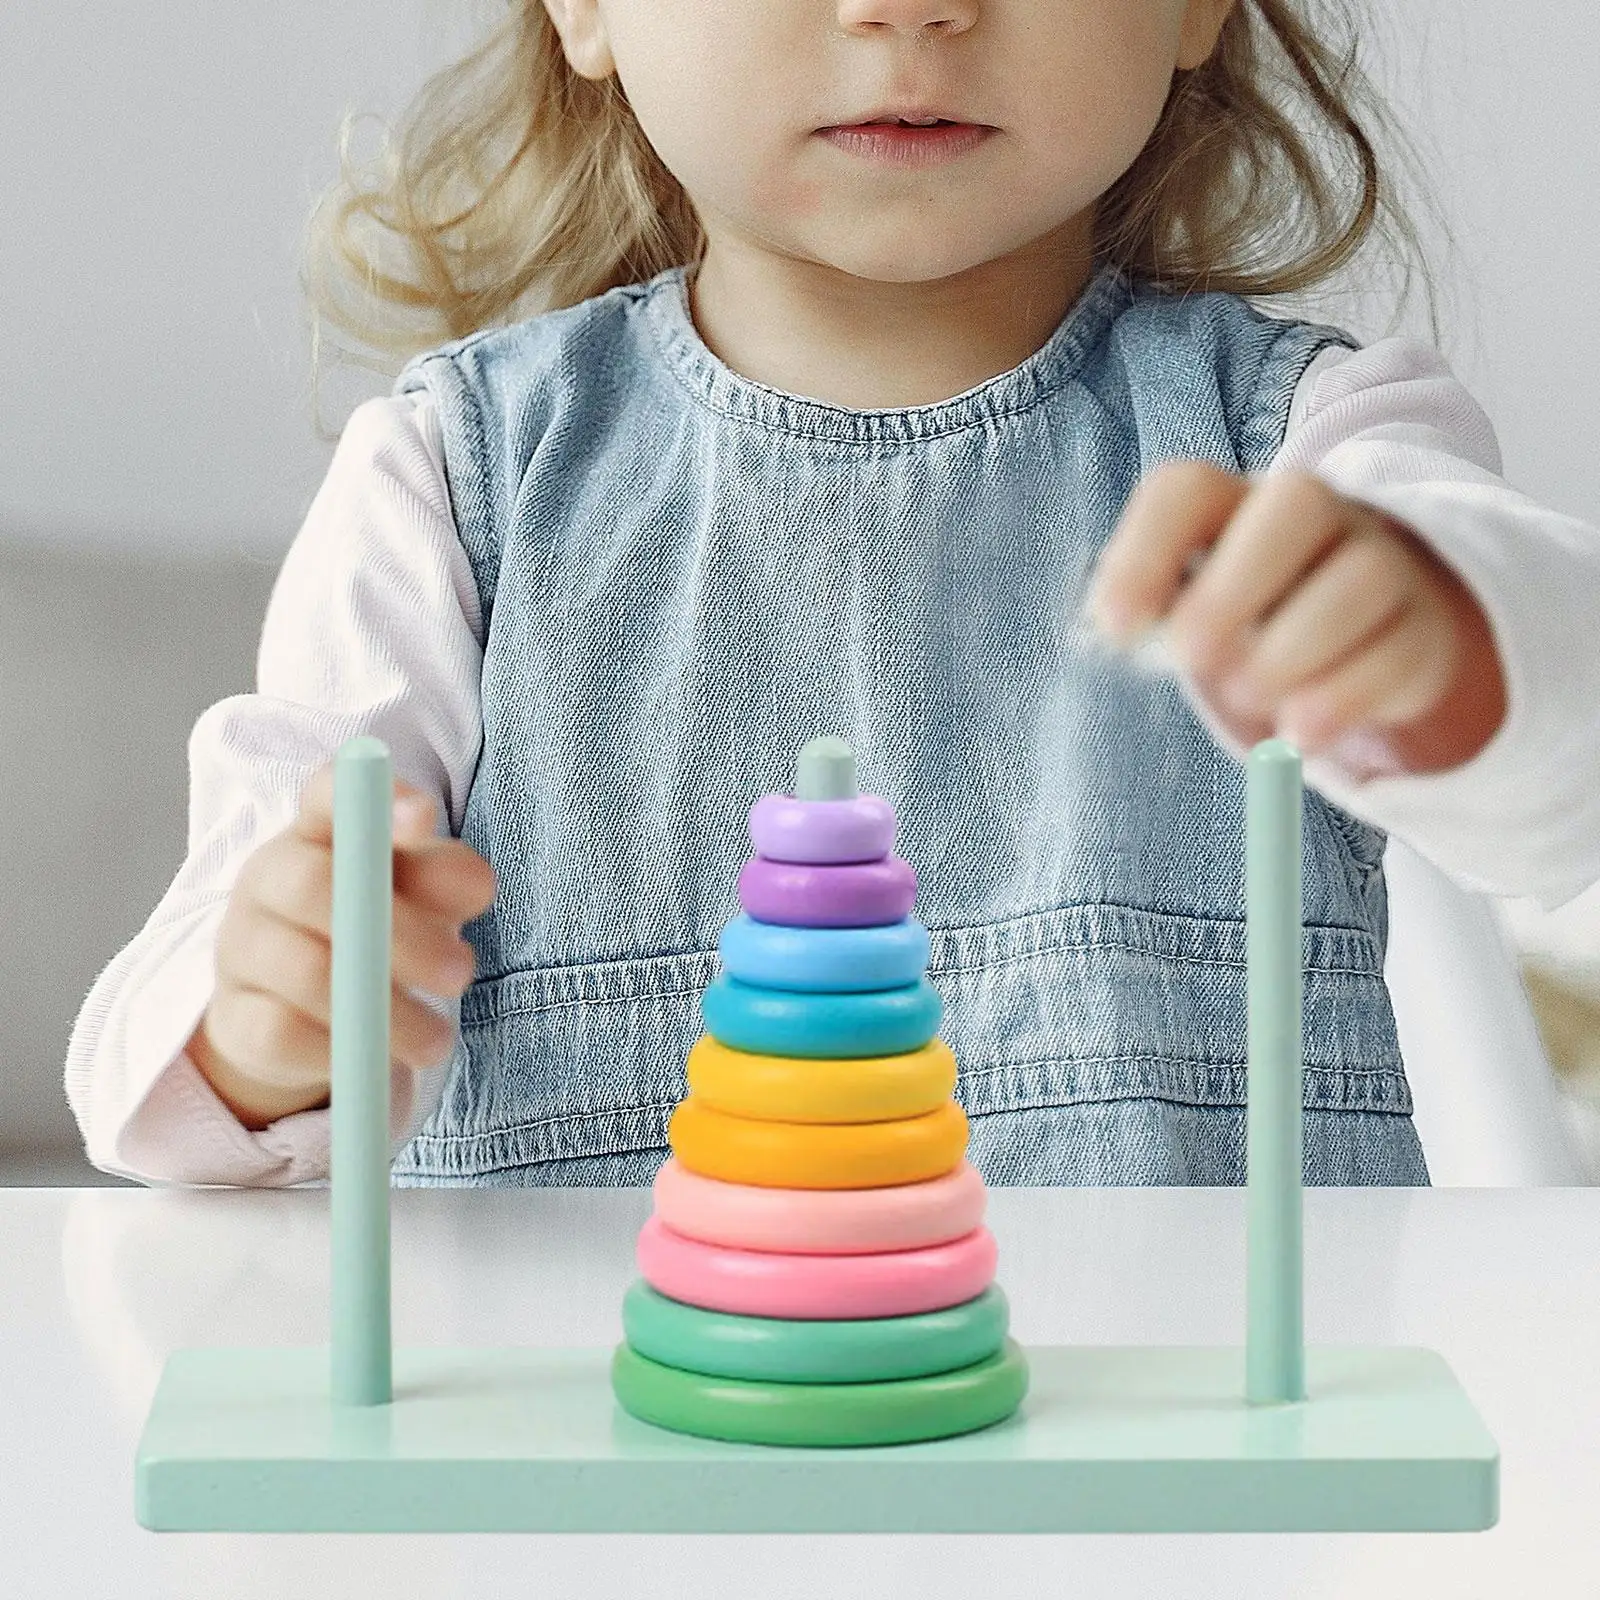 

Rainbow Stacking Rings Toy Sensory Toy Brain Teaser Interactive Counting Game Montessori Toy for Infant Ages 6+ Months Kids